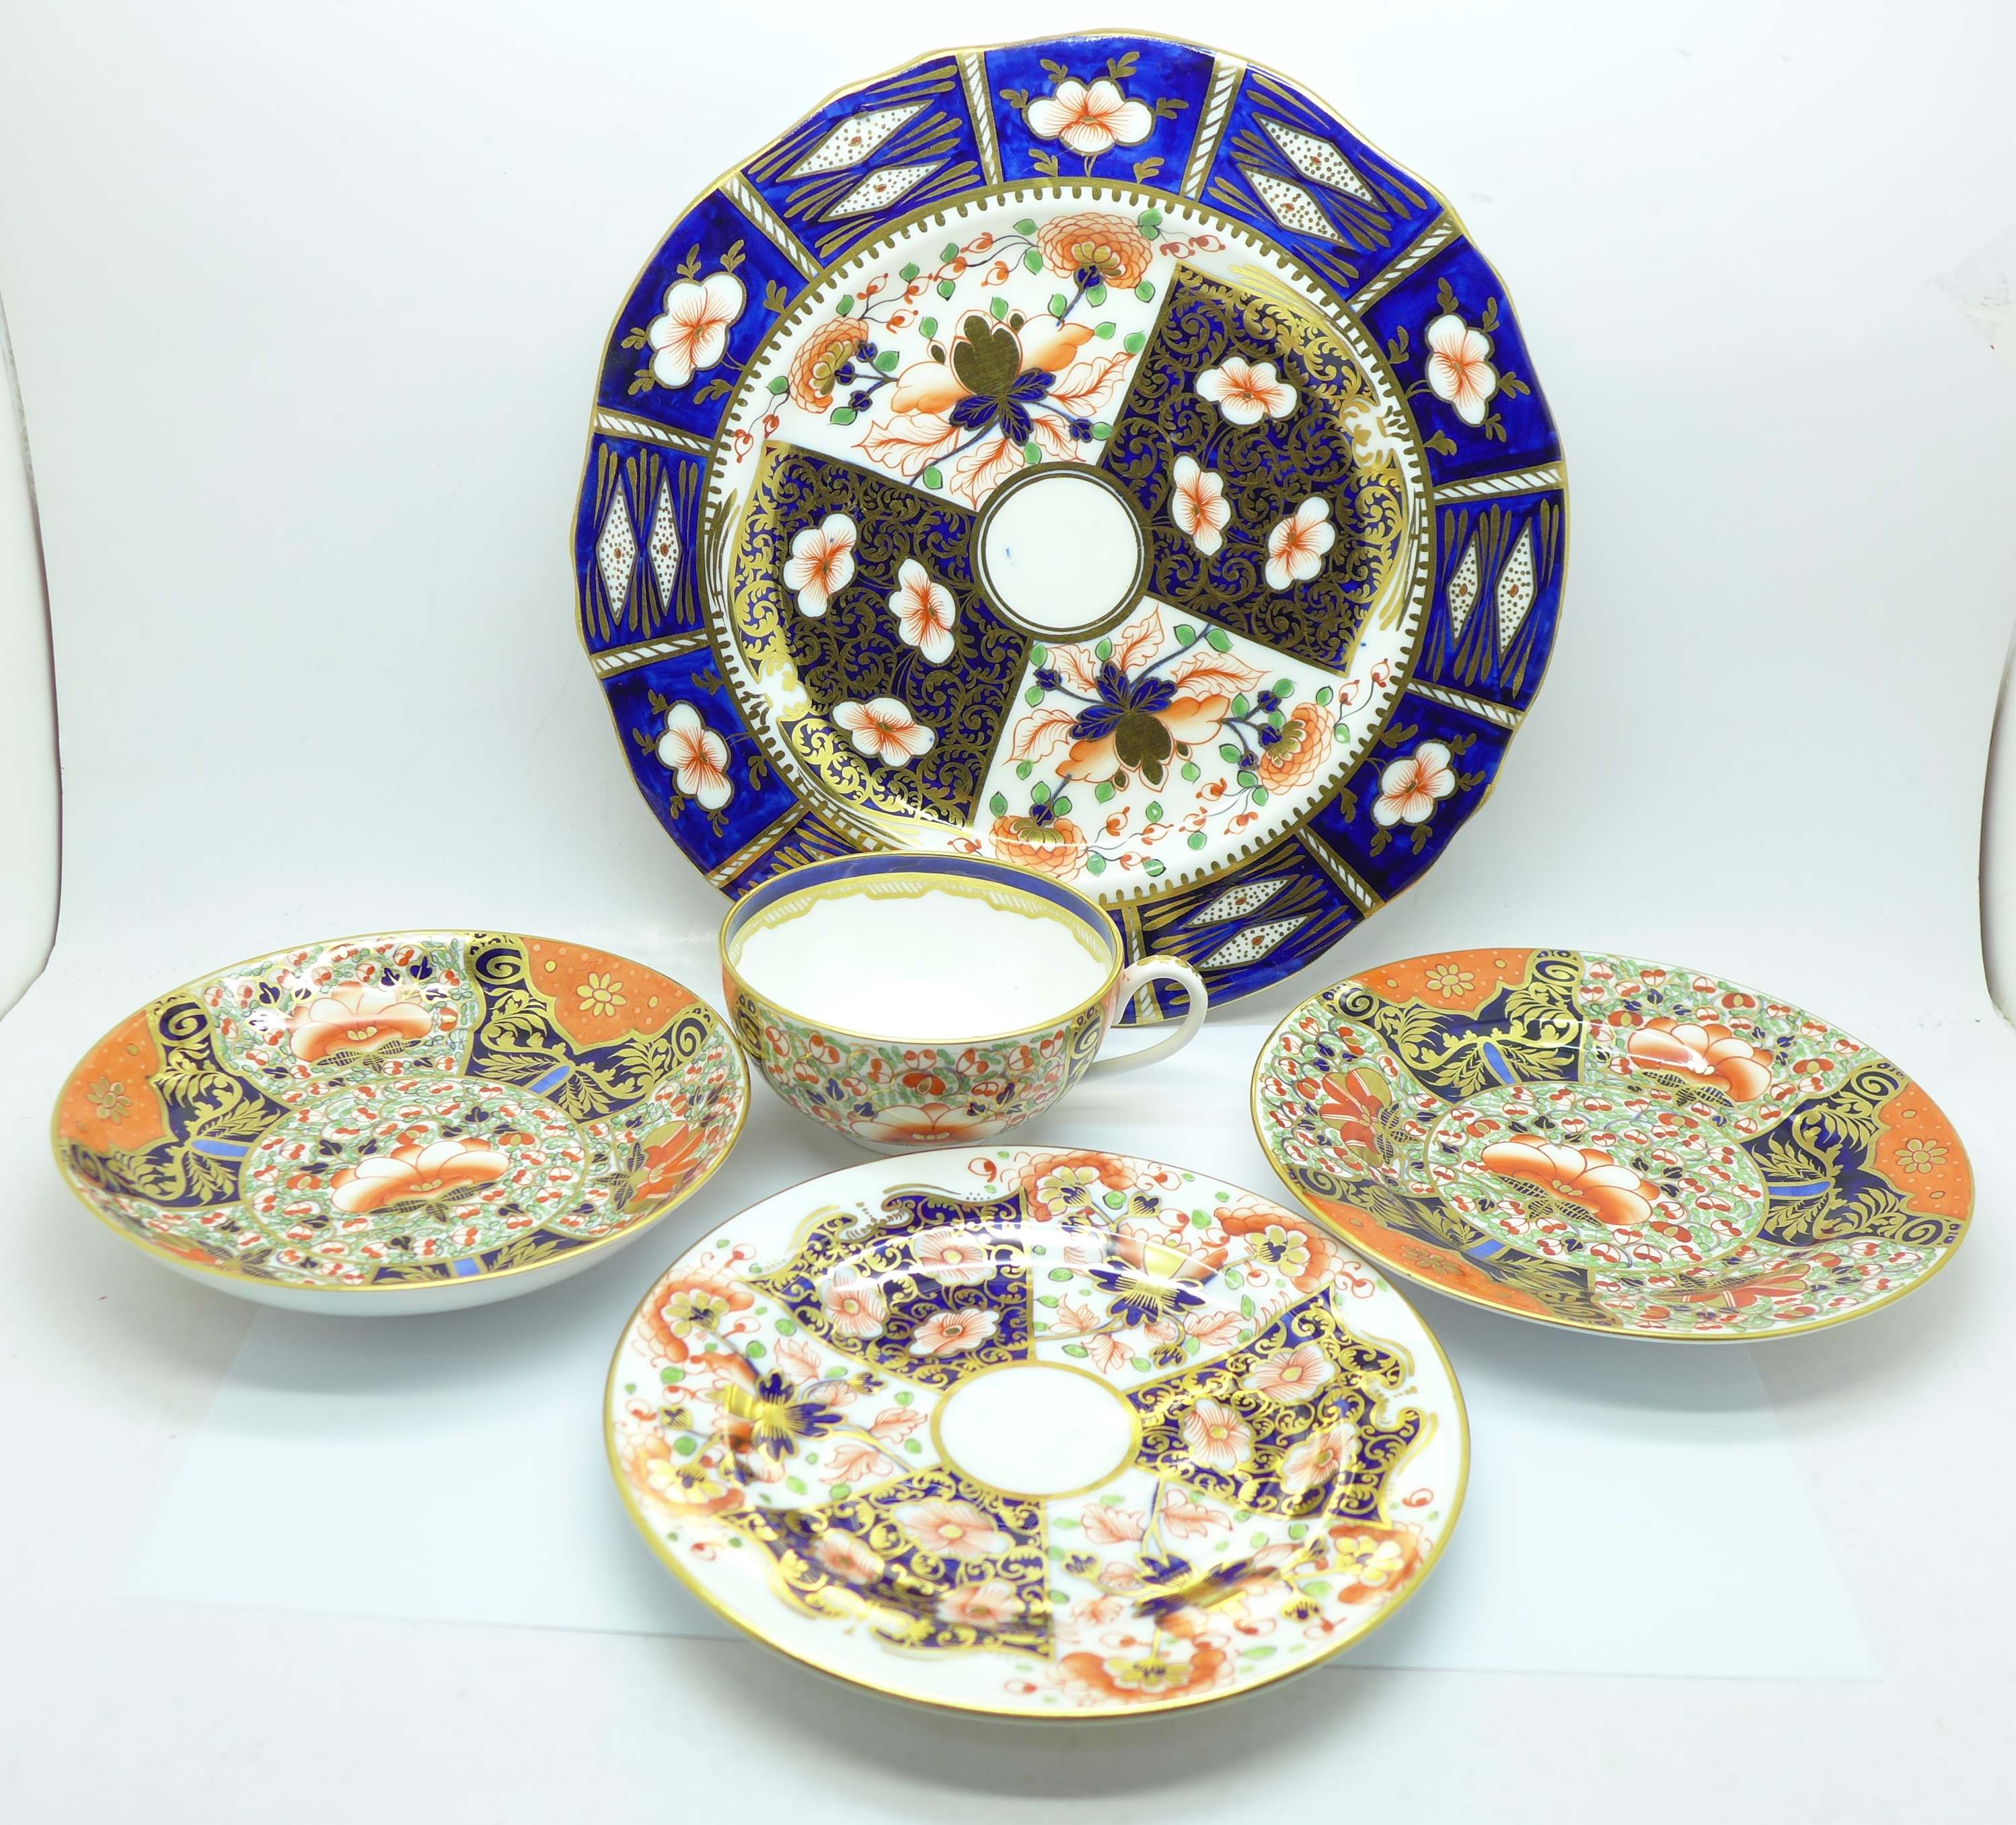 A Derby S & Hancock trio, (plate, cup and saucer), circa 1861, and two S & Hancock plates, 23 and